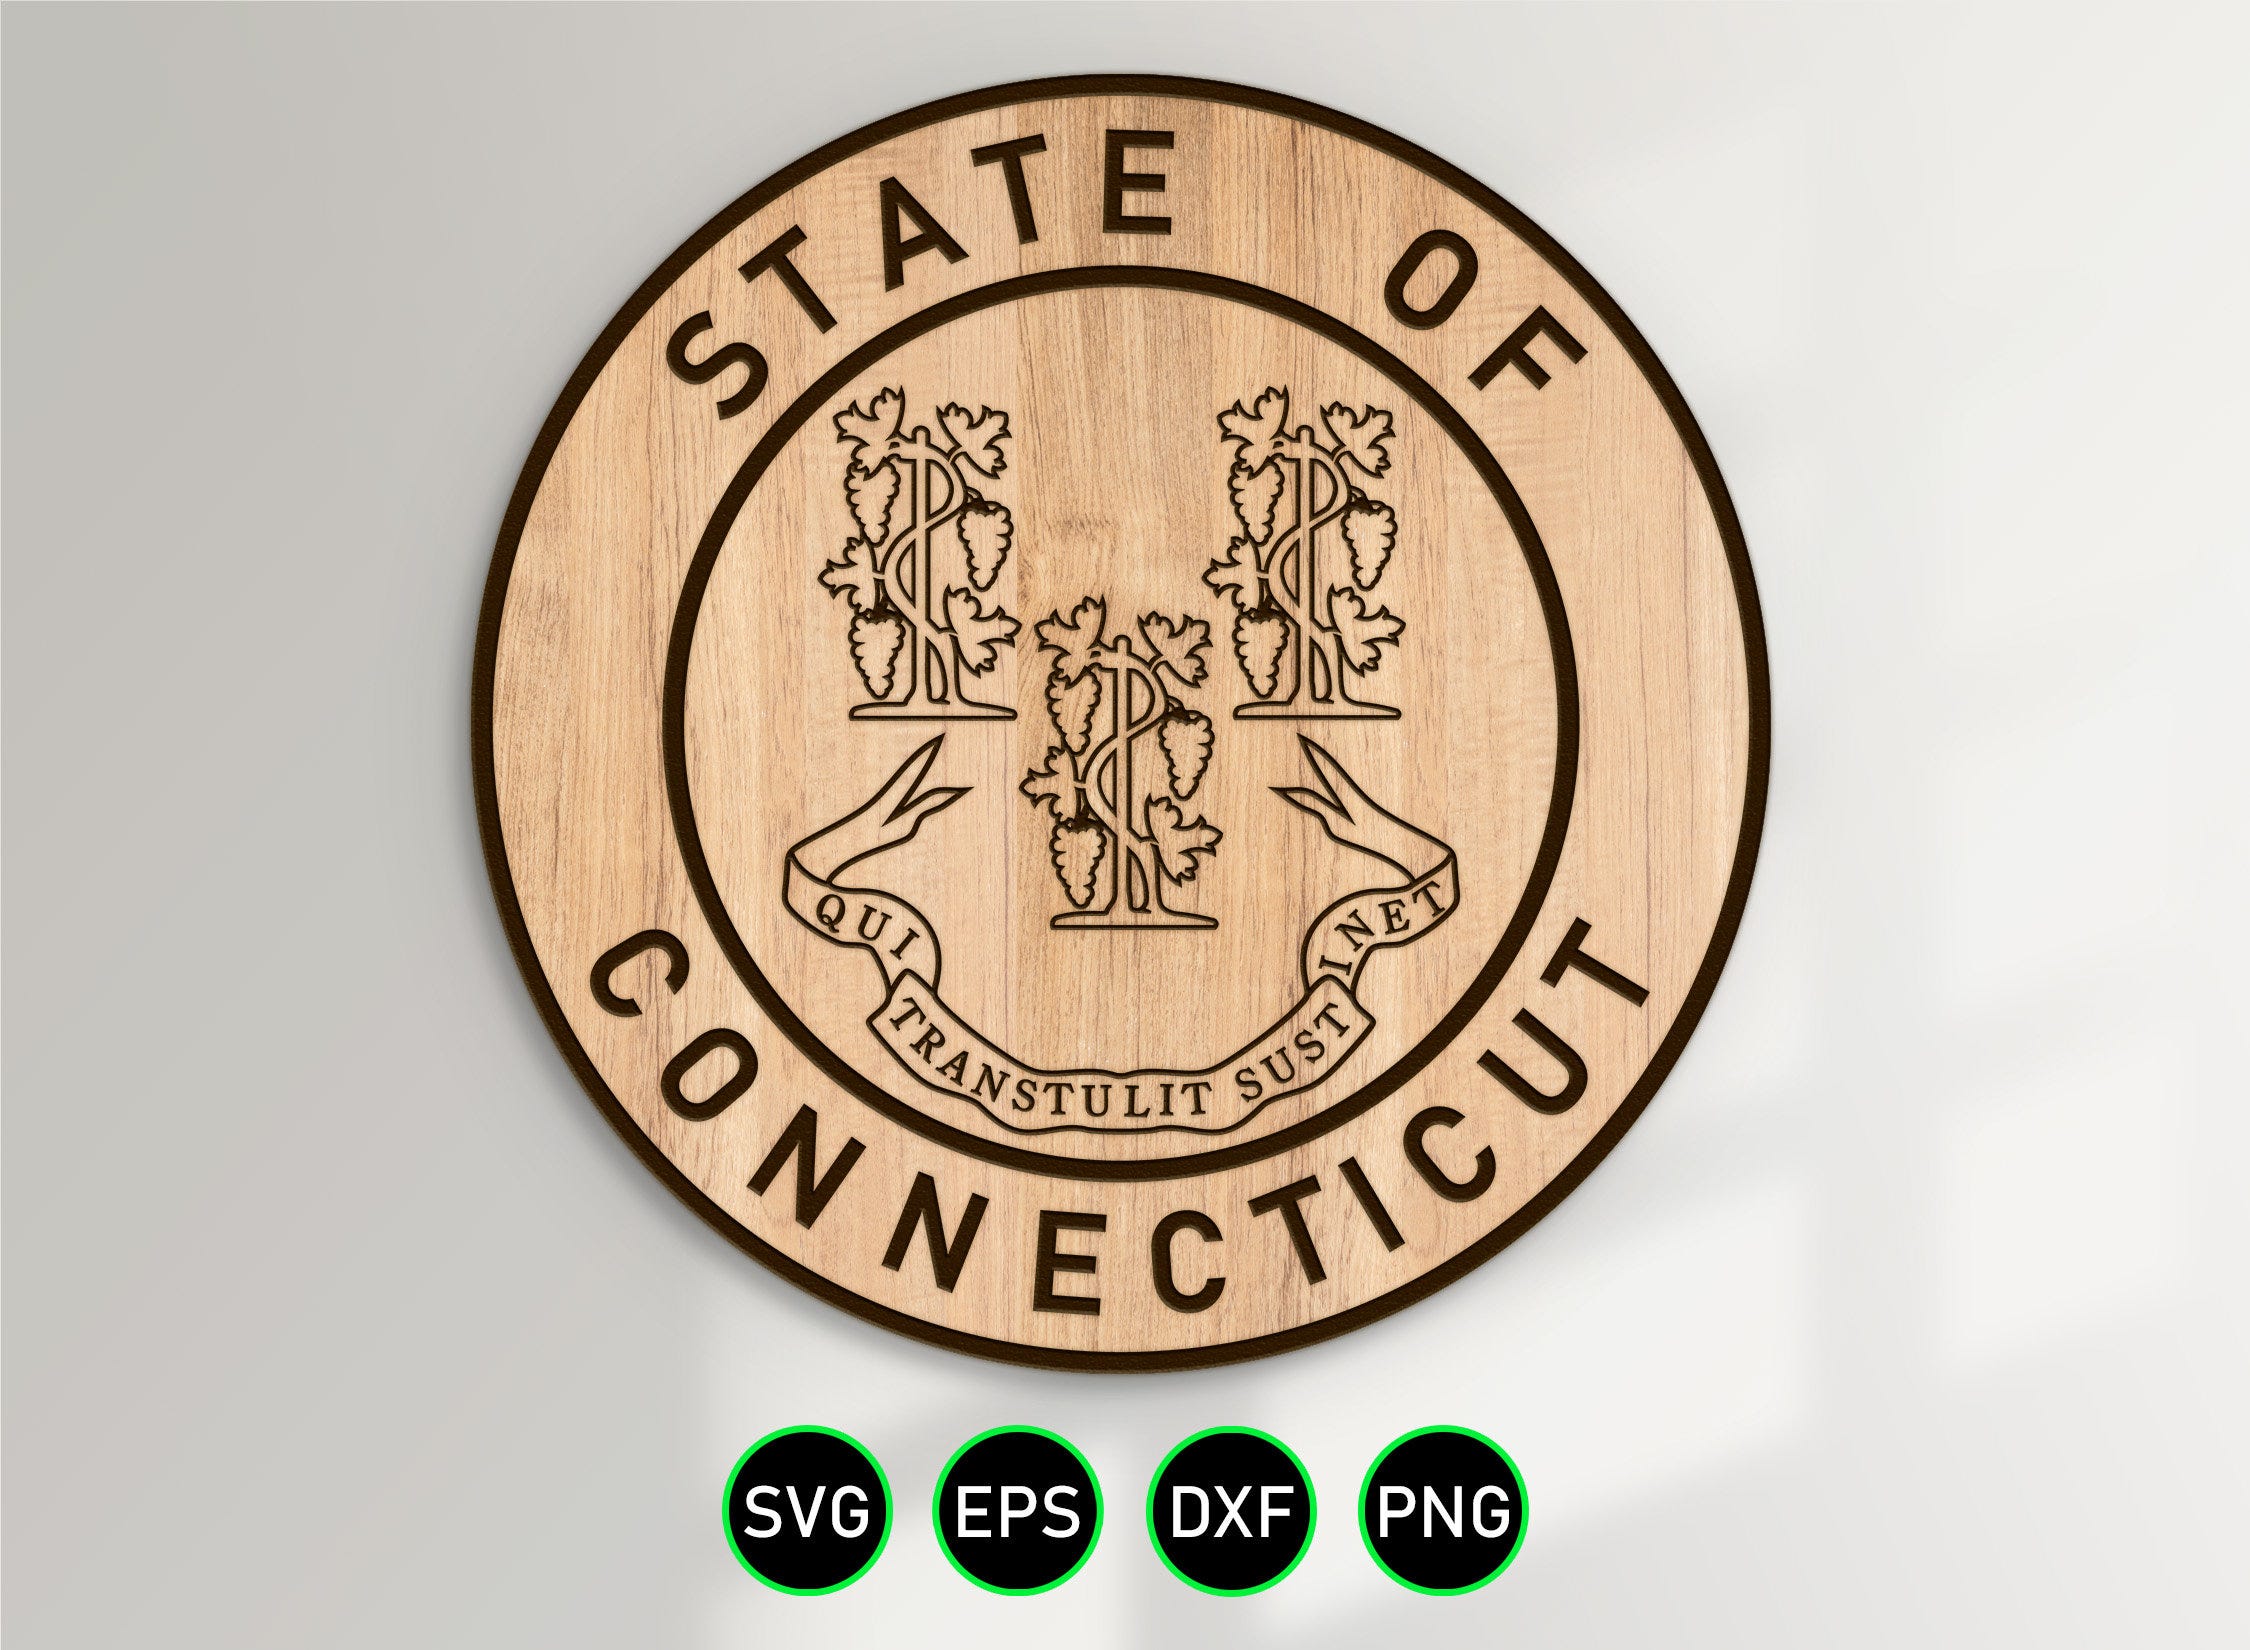 Connecticut State Seal SVG, Great State Seal of Connecticut Simple Design vector clipart for laser engraving, vinyl cutters and print